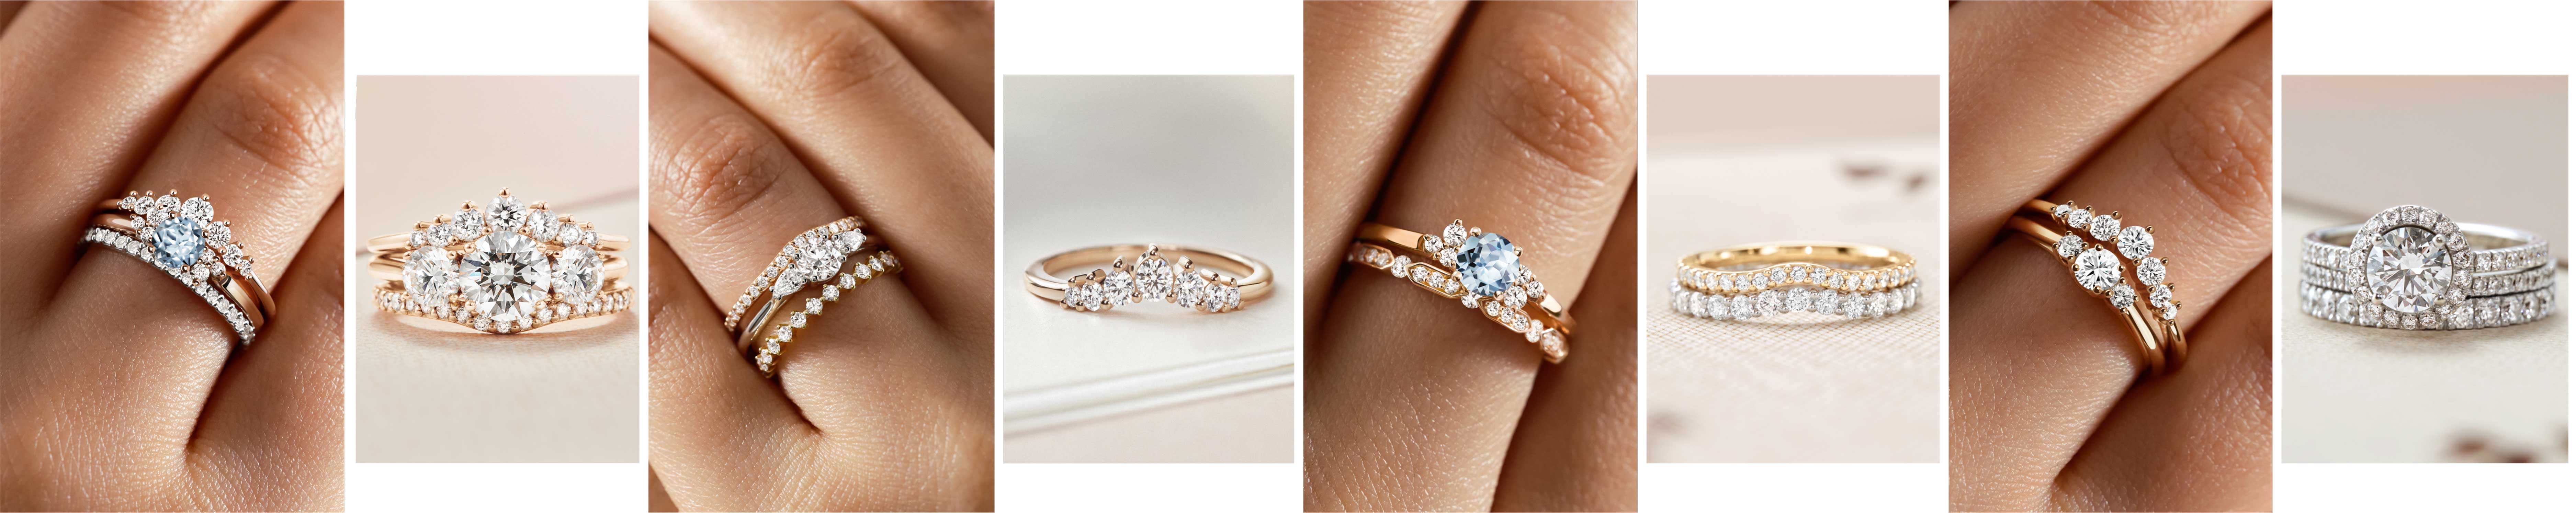 Engagement rings and wedding bands